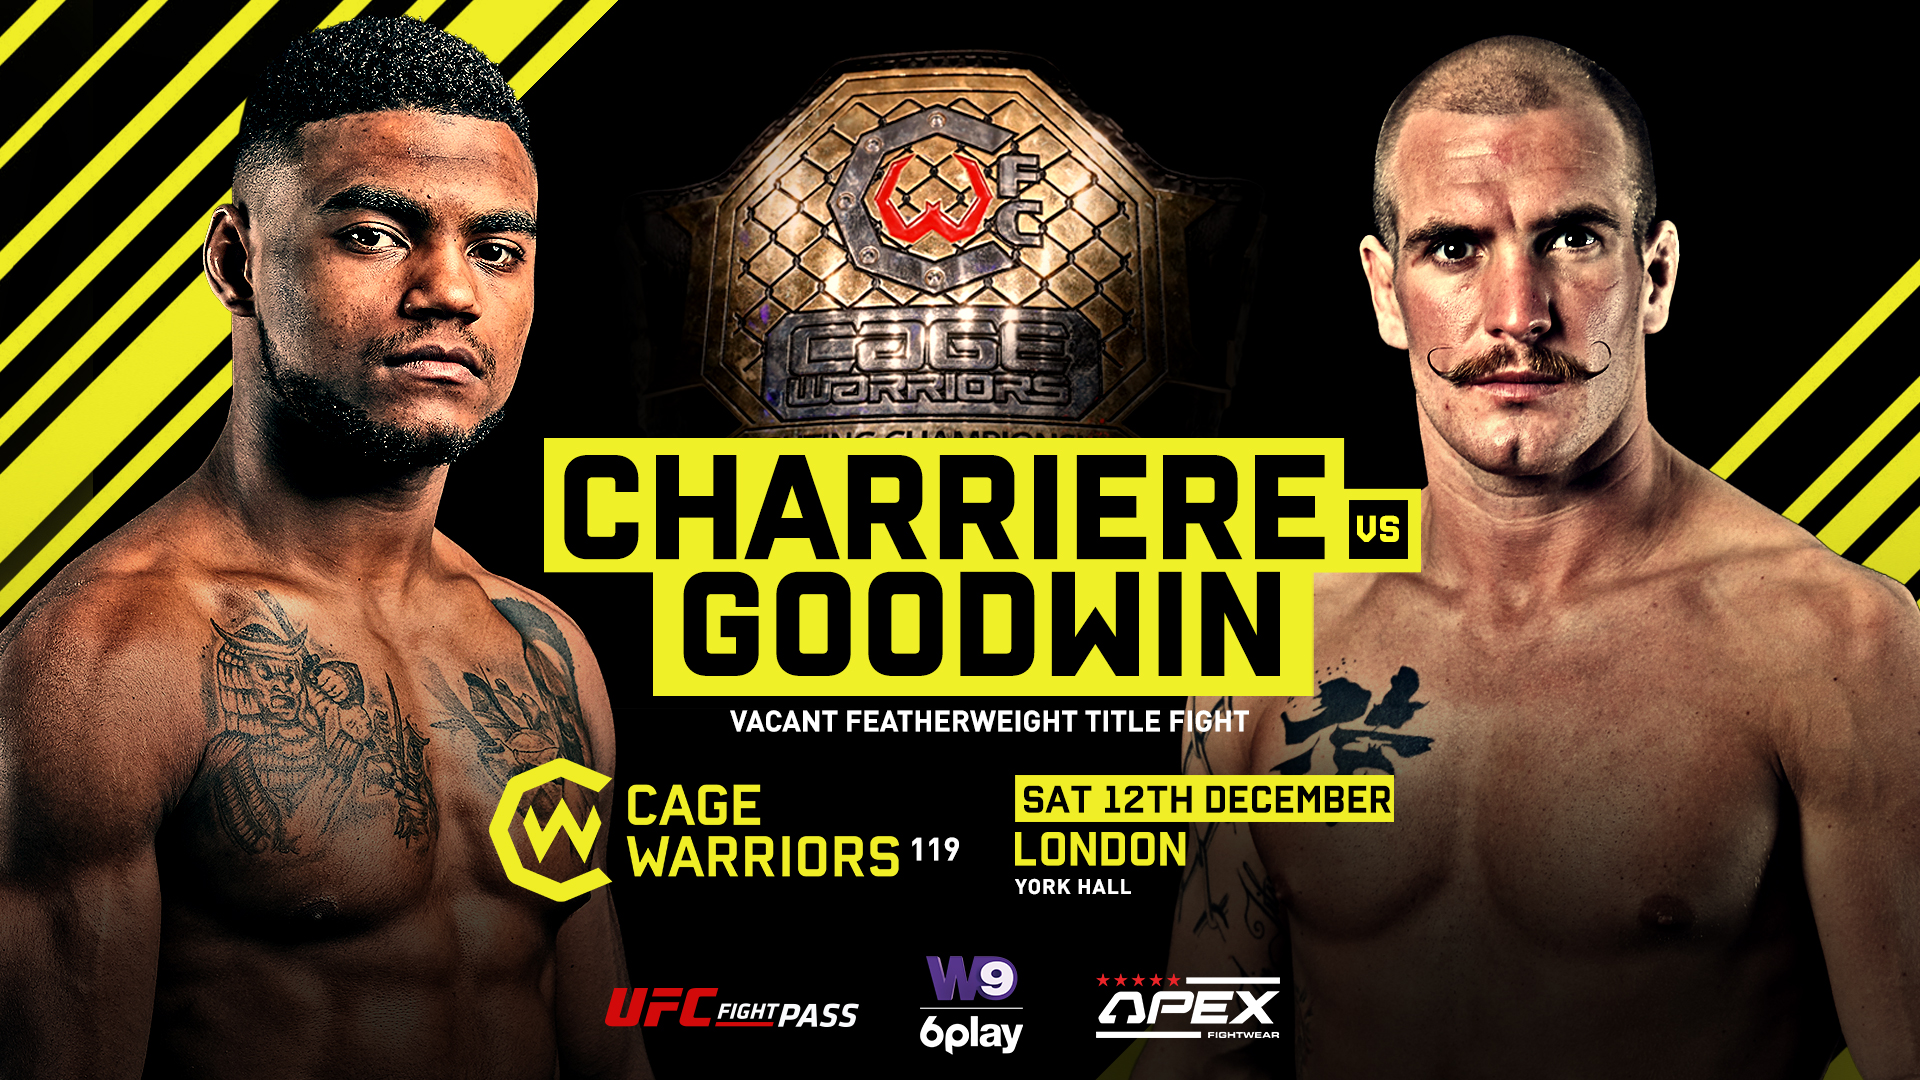 Cage Warriors 119 Charriere vs